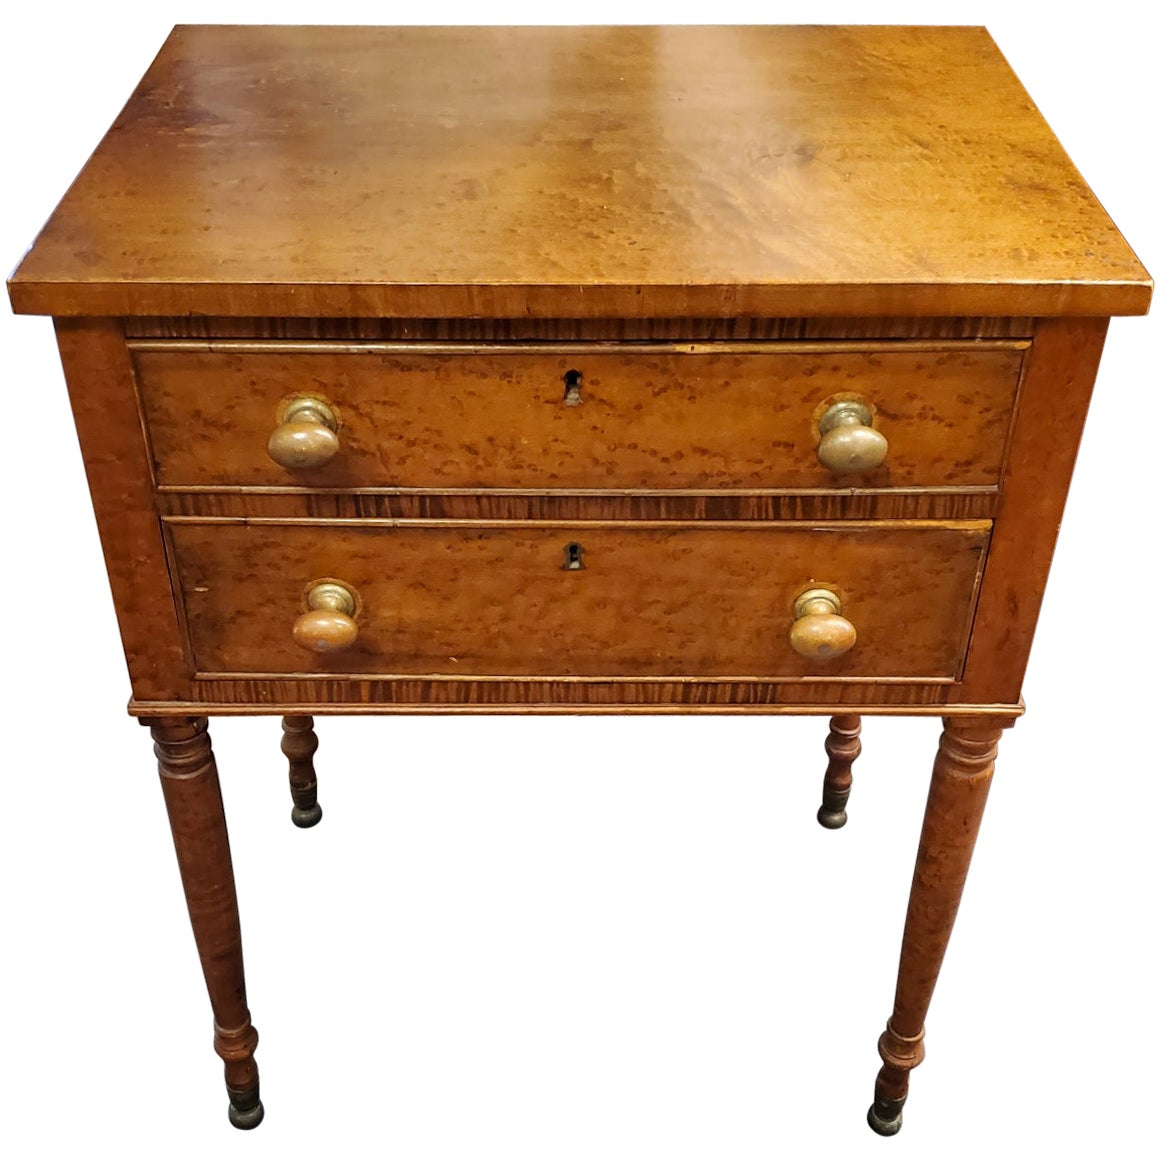 Mid 19th Century New England Birdseye Maple Side Table with Two Drawers For Sale